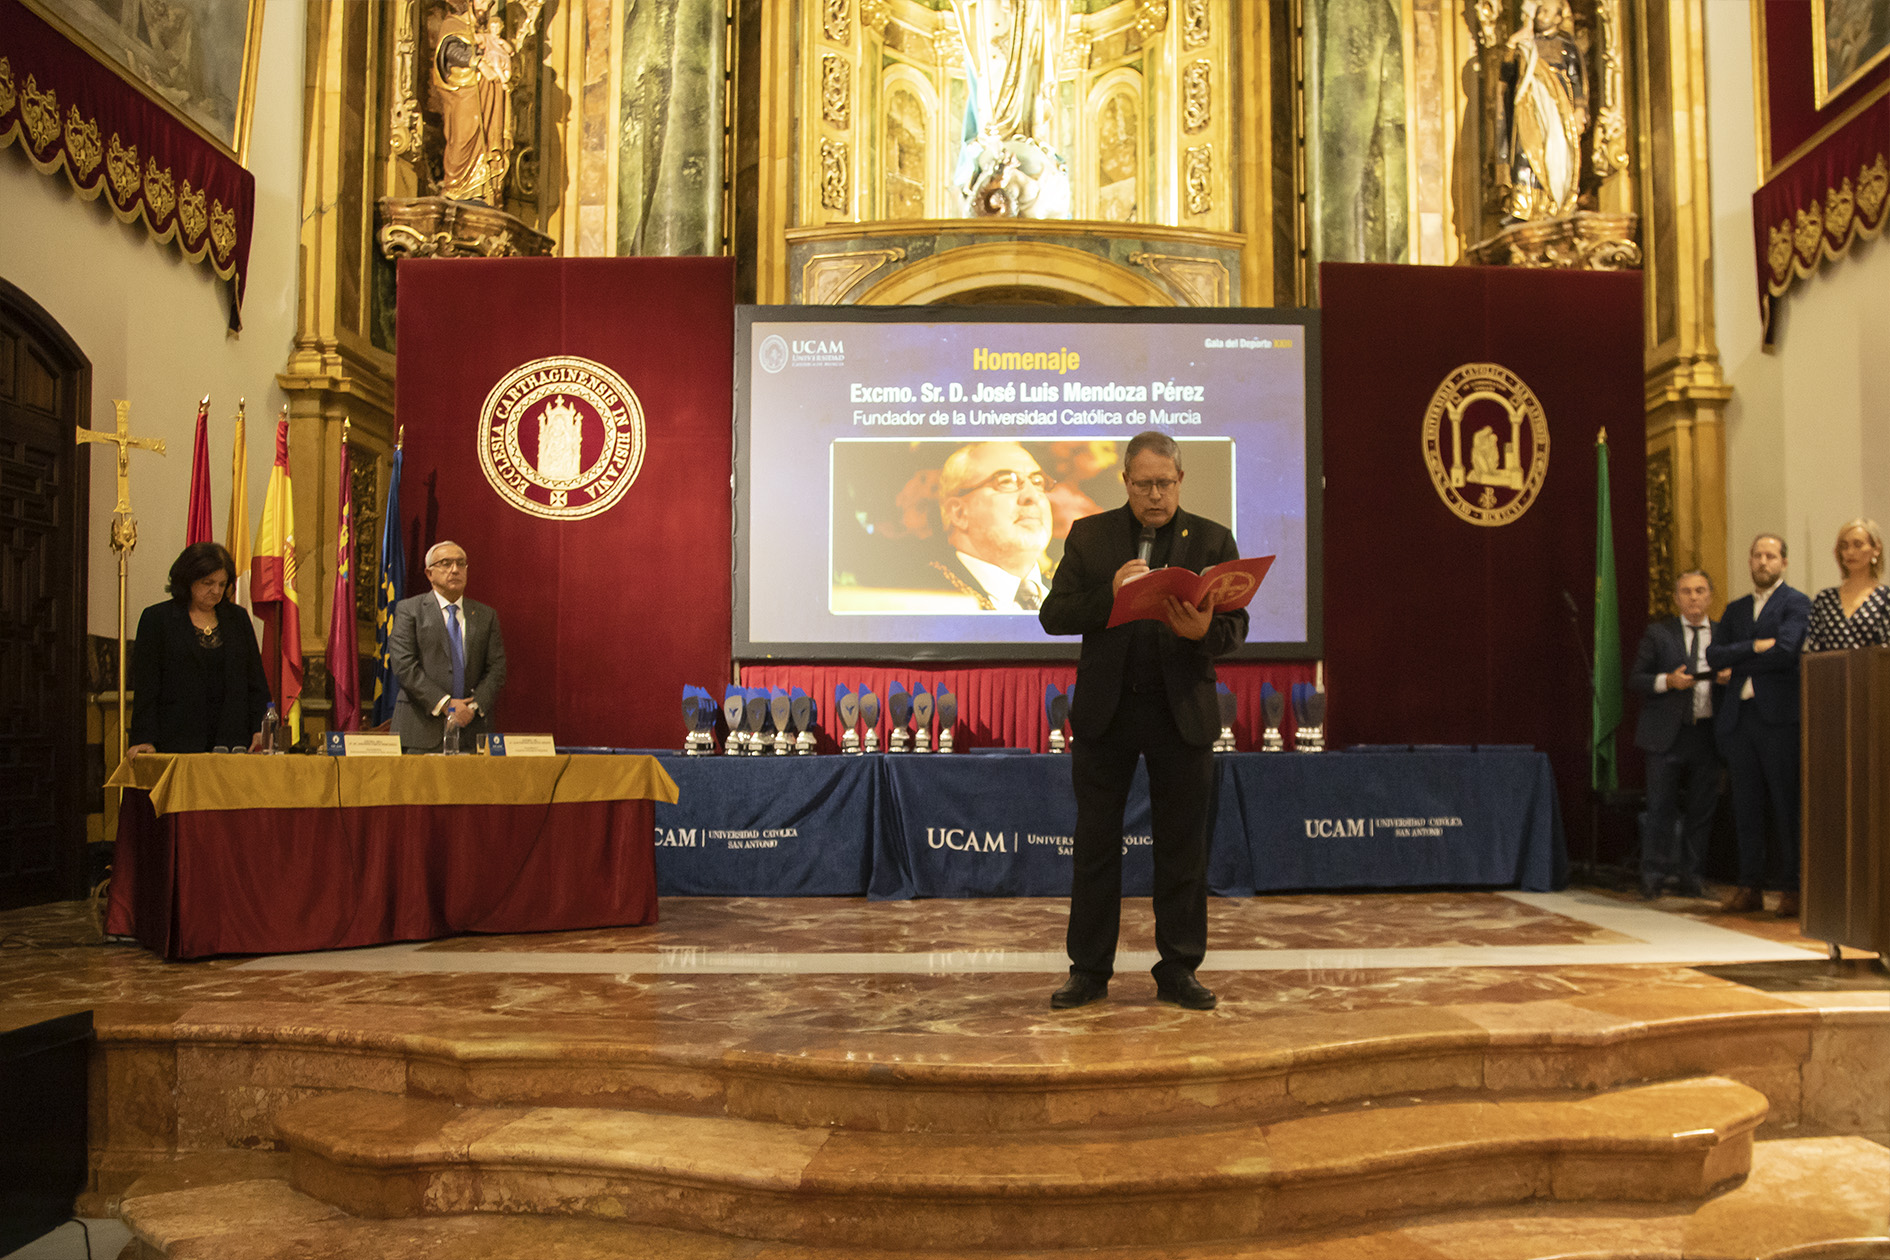 The 23rd UCAM Sports Gala pays tribute to José Luis Mendoza